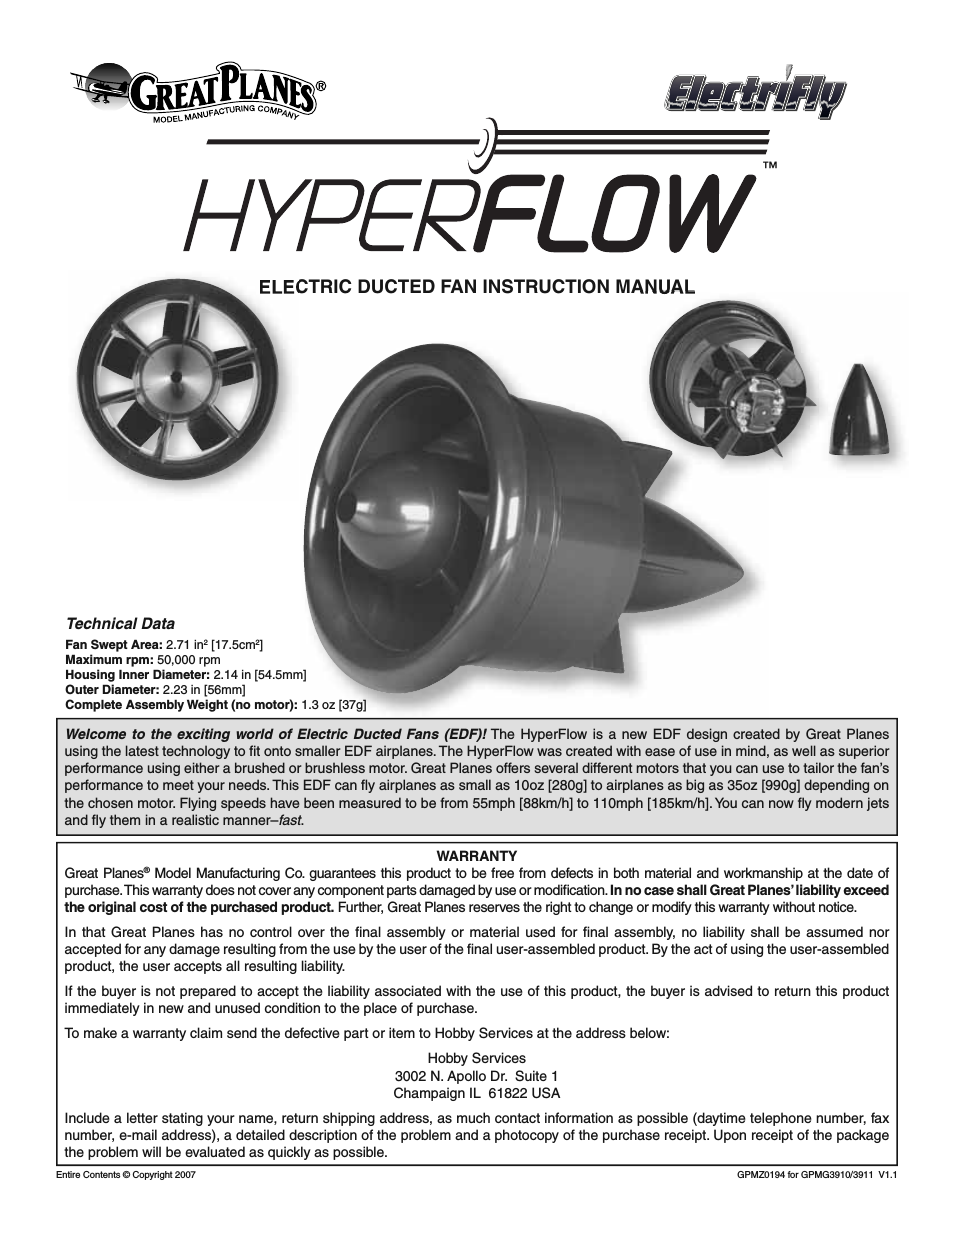 HyperFlow Ducted Fan System - GPMG3910/3911